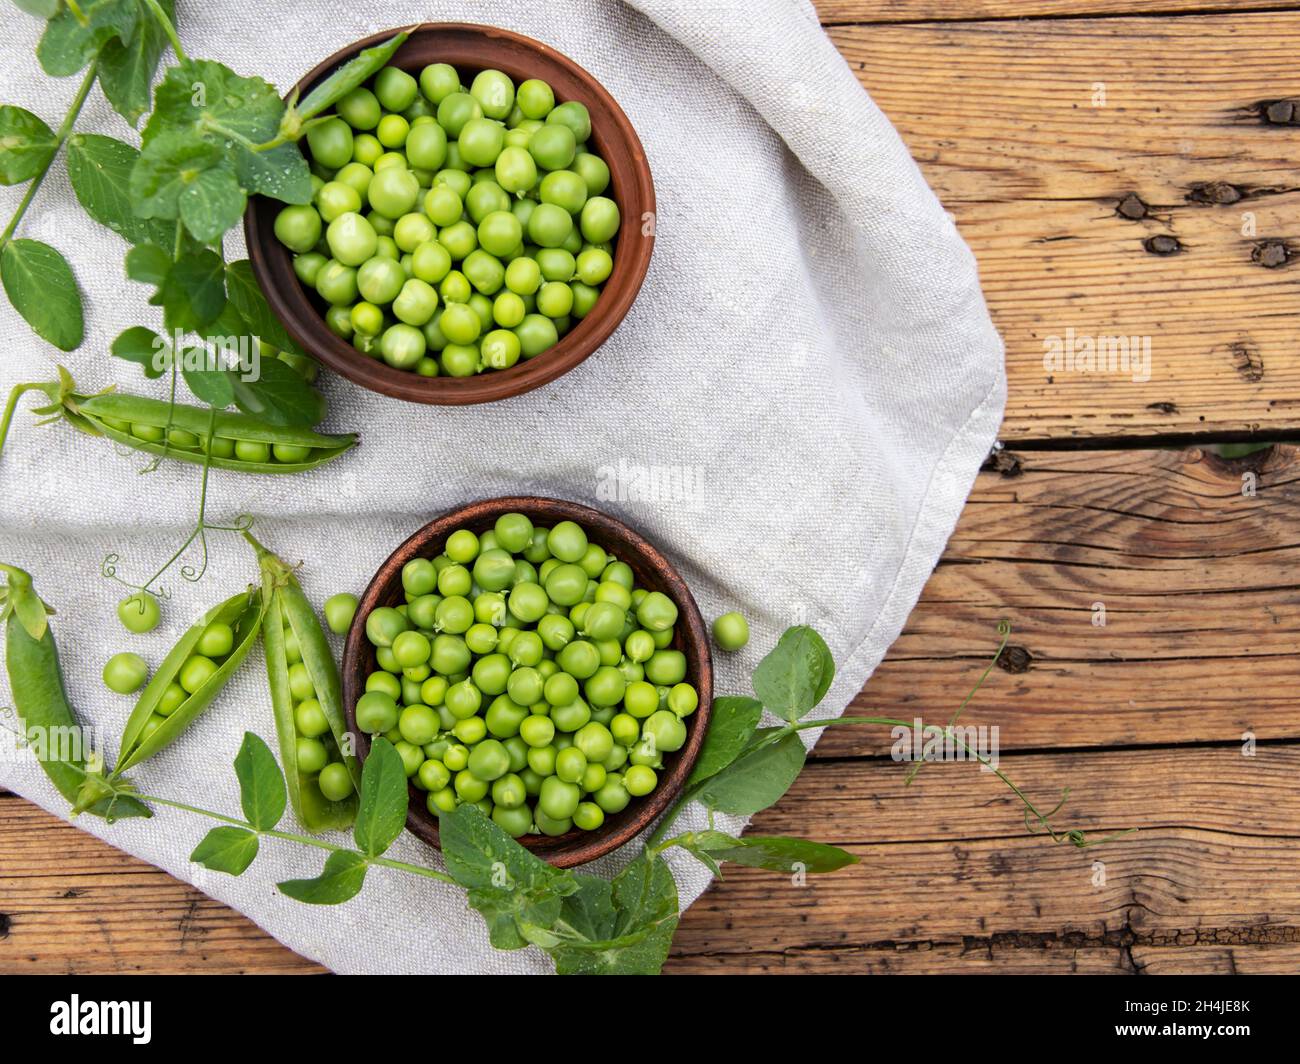 Fresh green peas young in bowl, on wood table, close up, seeds, pods, sprouts. Stock Photo